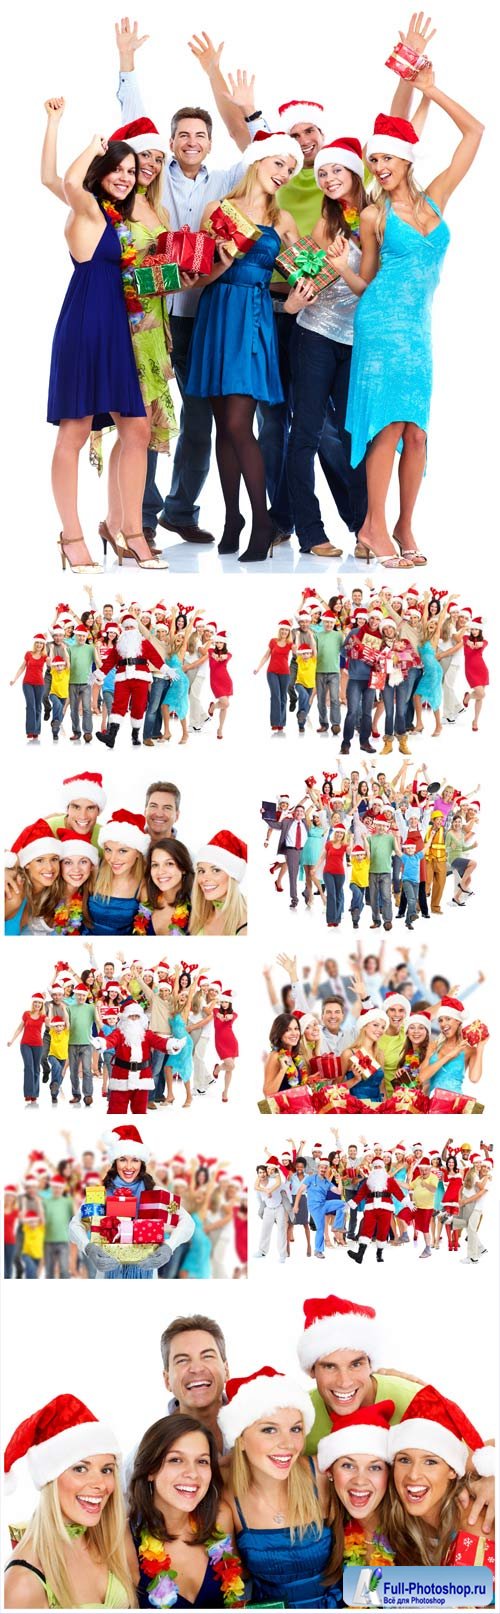 People and the New Year, Christmas